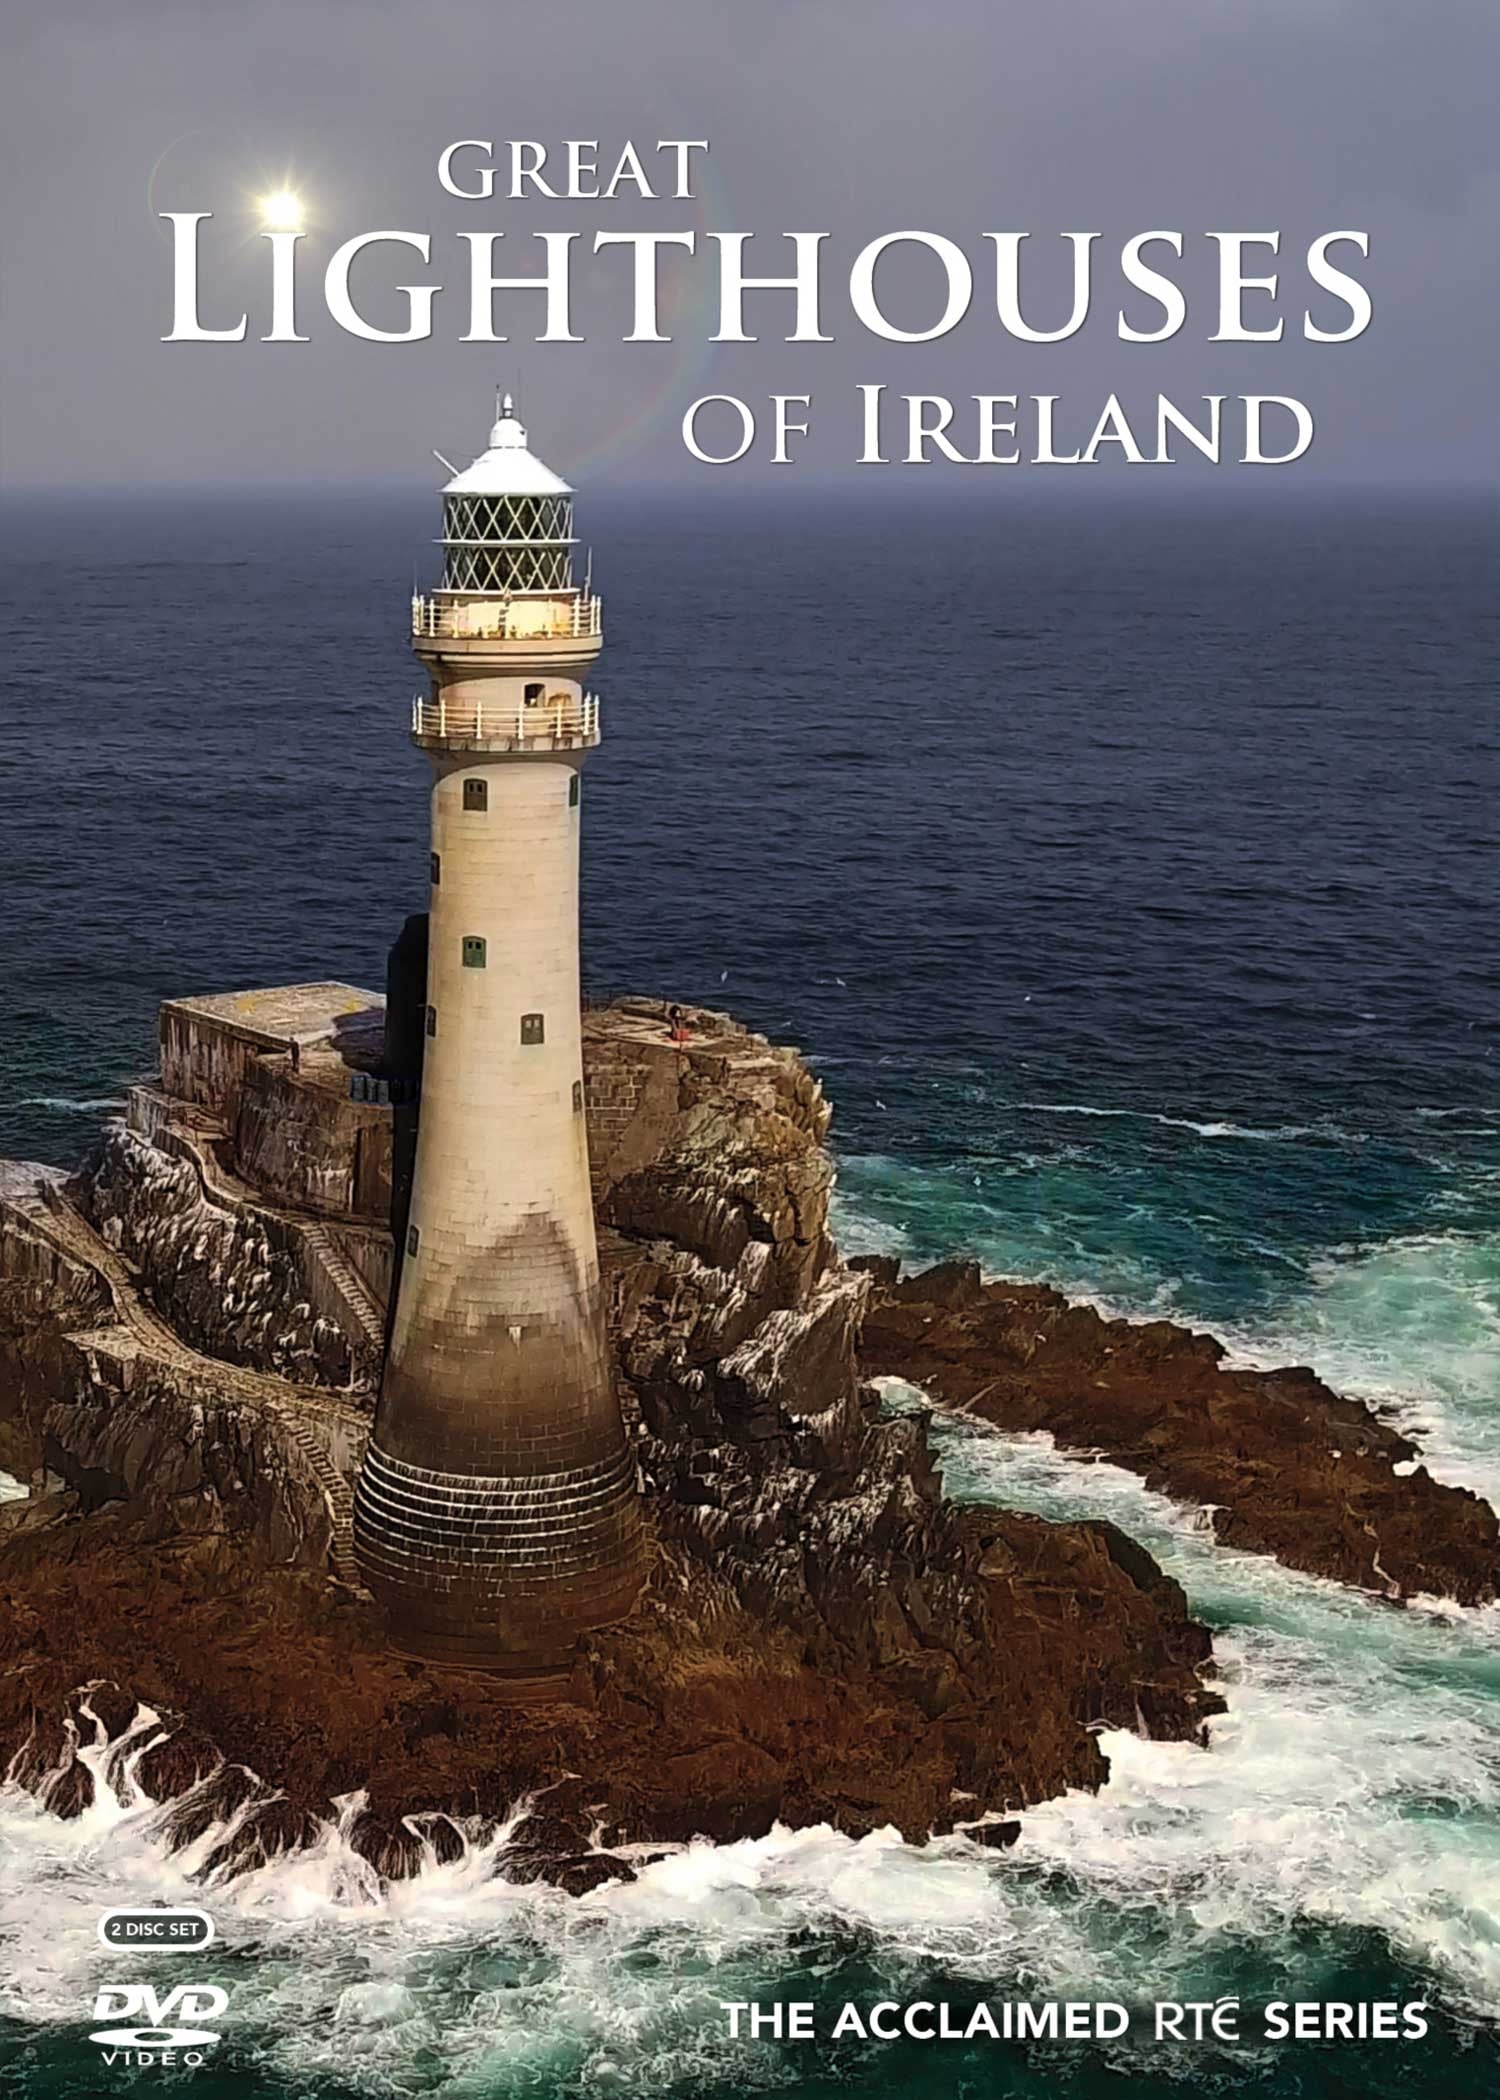 Great Lighthouses of Ireland TV Shows About Atlantic Ocean